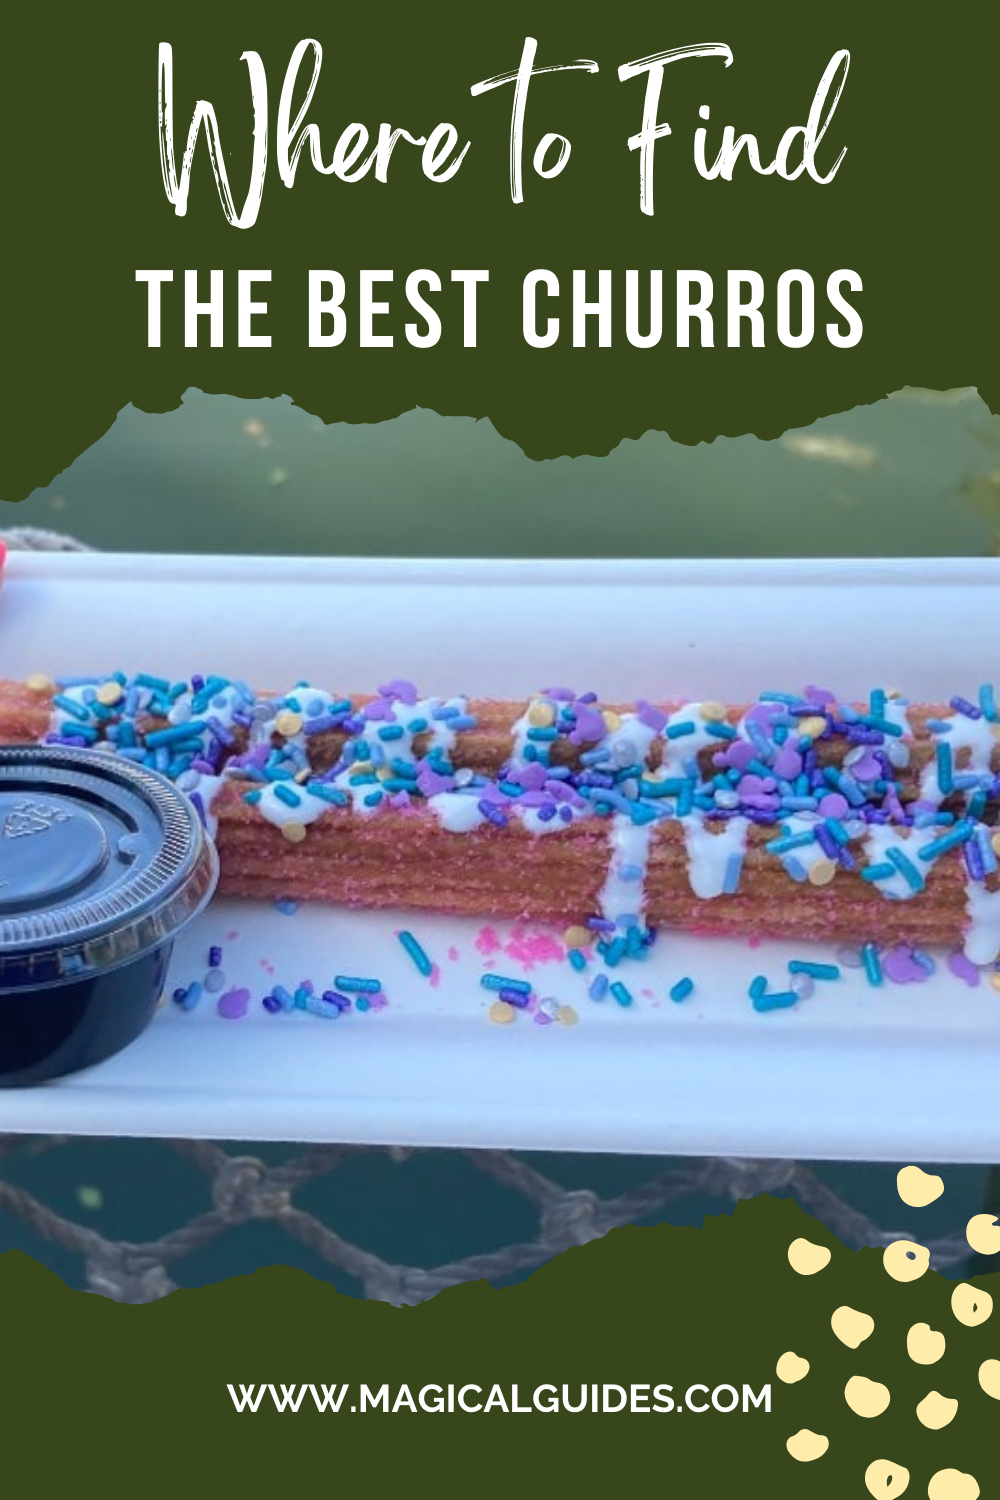 Indulge in a sprinkle-topped cake while planning your next churro adventure at Disney World. Disney Snacks are the best, check out our guide to finding all the different types of Churros at Disney World.